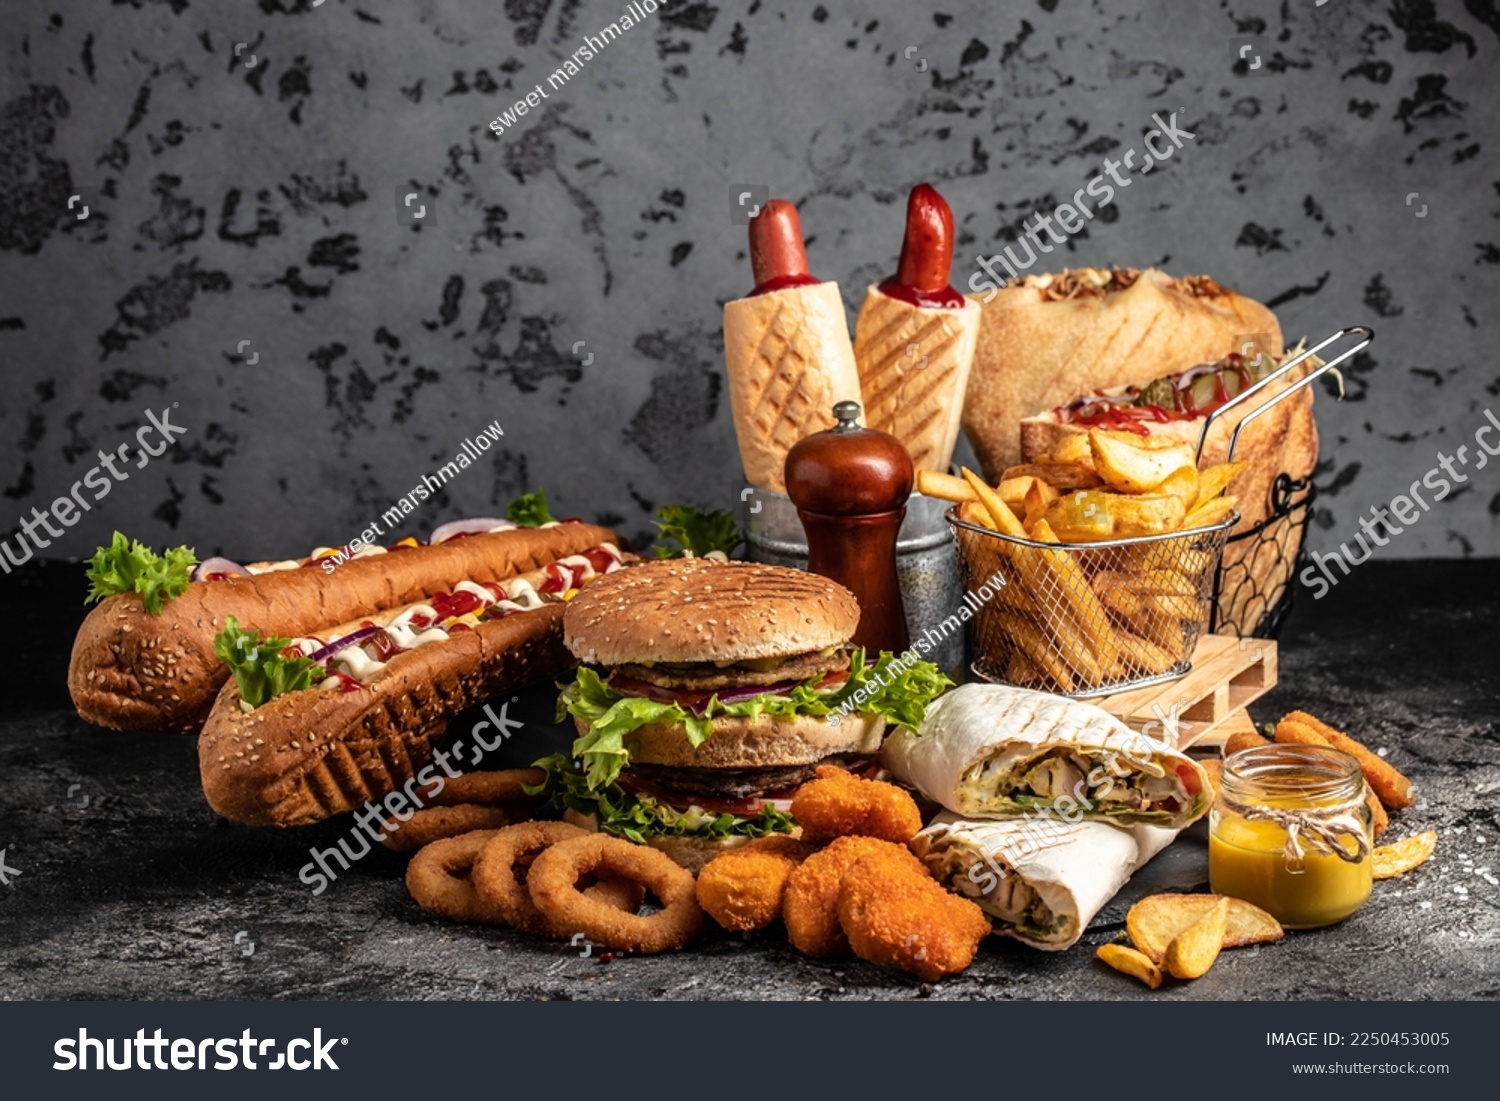 take away fast food products Kebab, pita, gyros, shaurma, wrap sandwich with french fries and nuggets meal, junk food and unhealthy food. banner, menu, recipe place for text. #2250453005